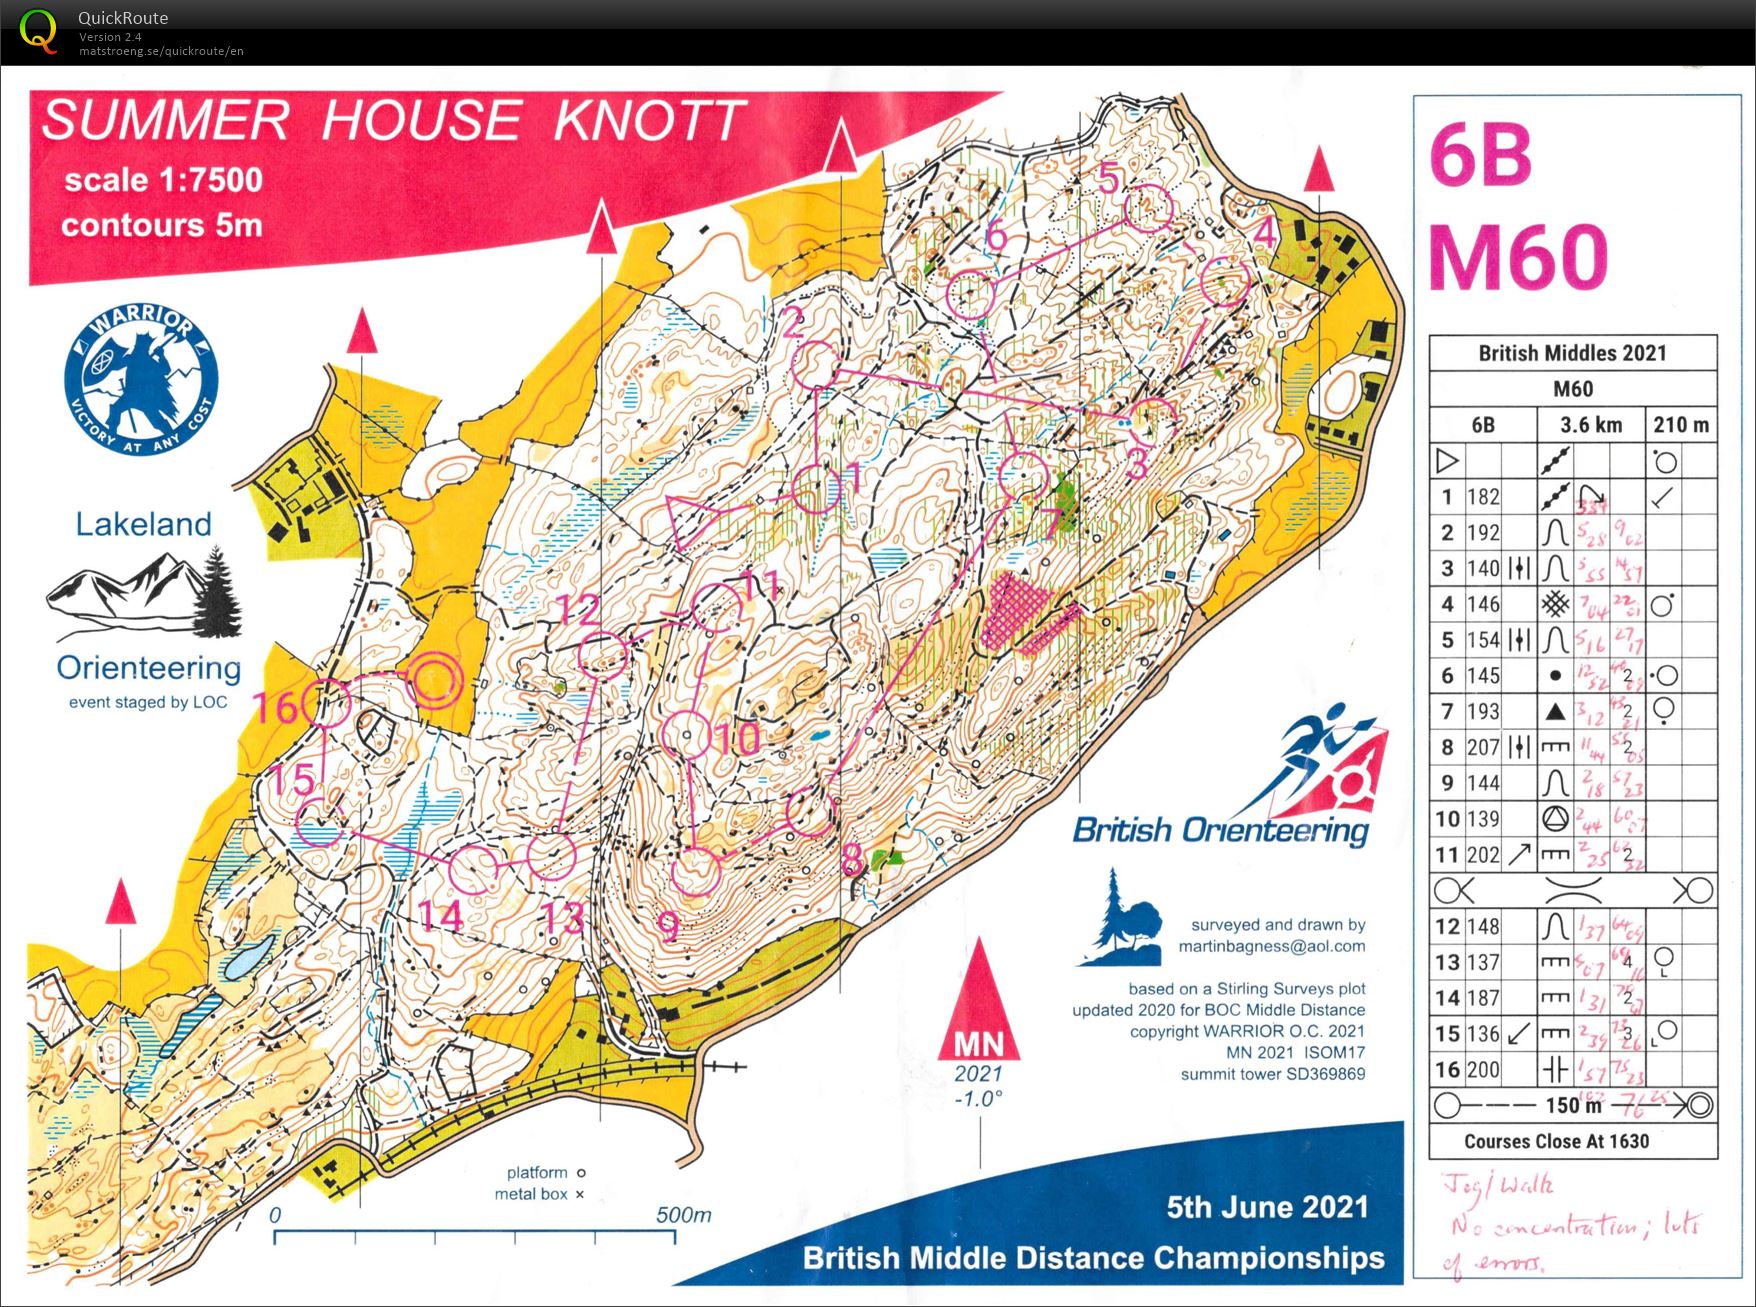 British Middle Distance Championships H60 (05/06/2021)